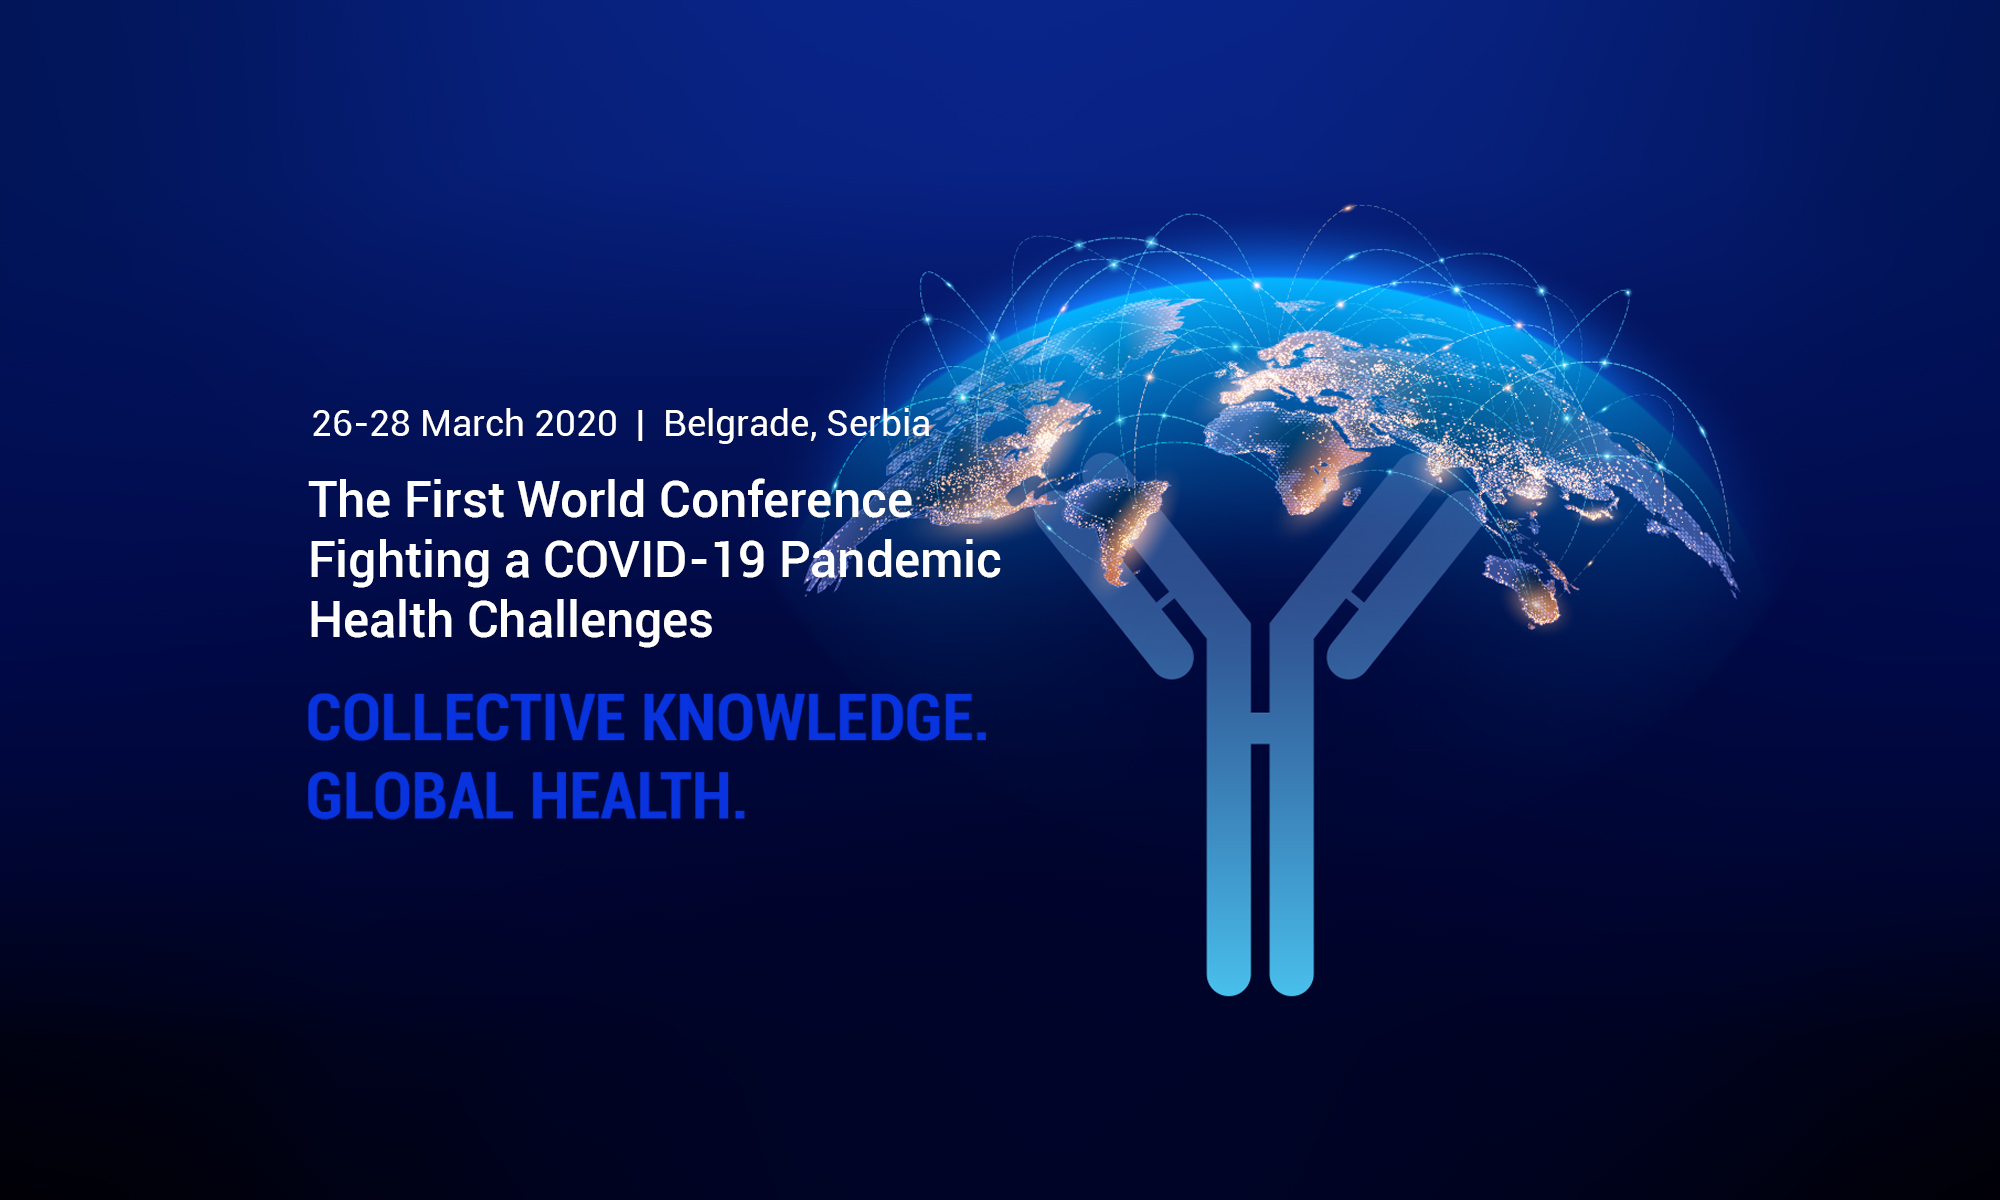 COLLECTIVE KNOWLEDGE. GLOBAL HEALTH.